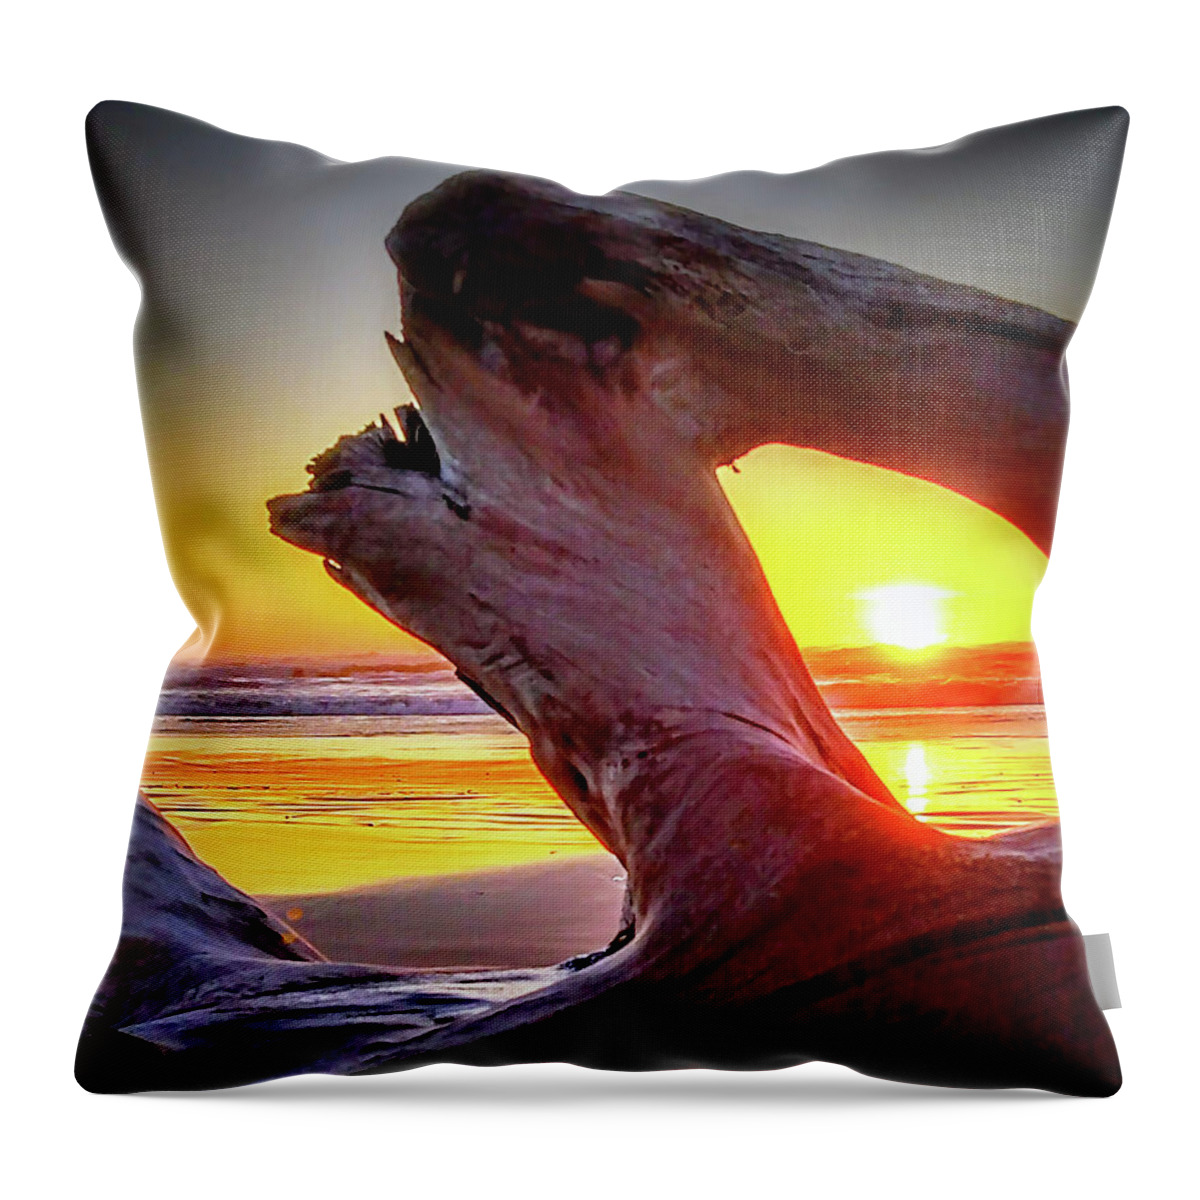 Sunset Throw Pillow featuring the photograph Serenity Through Wood by Mary Gaines